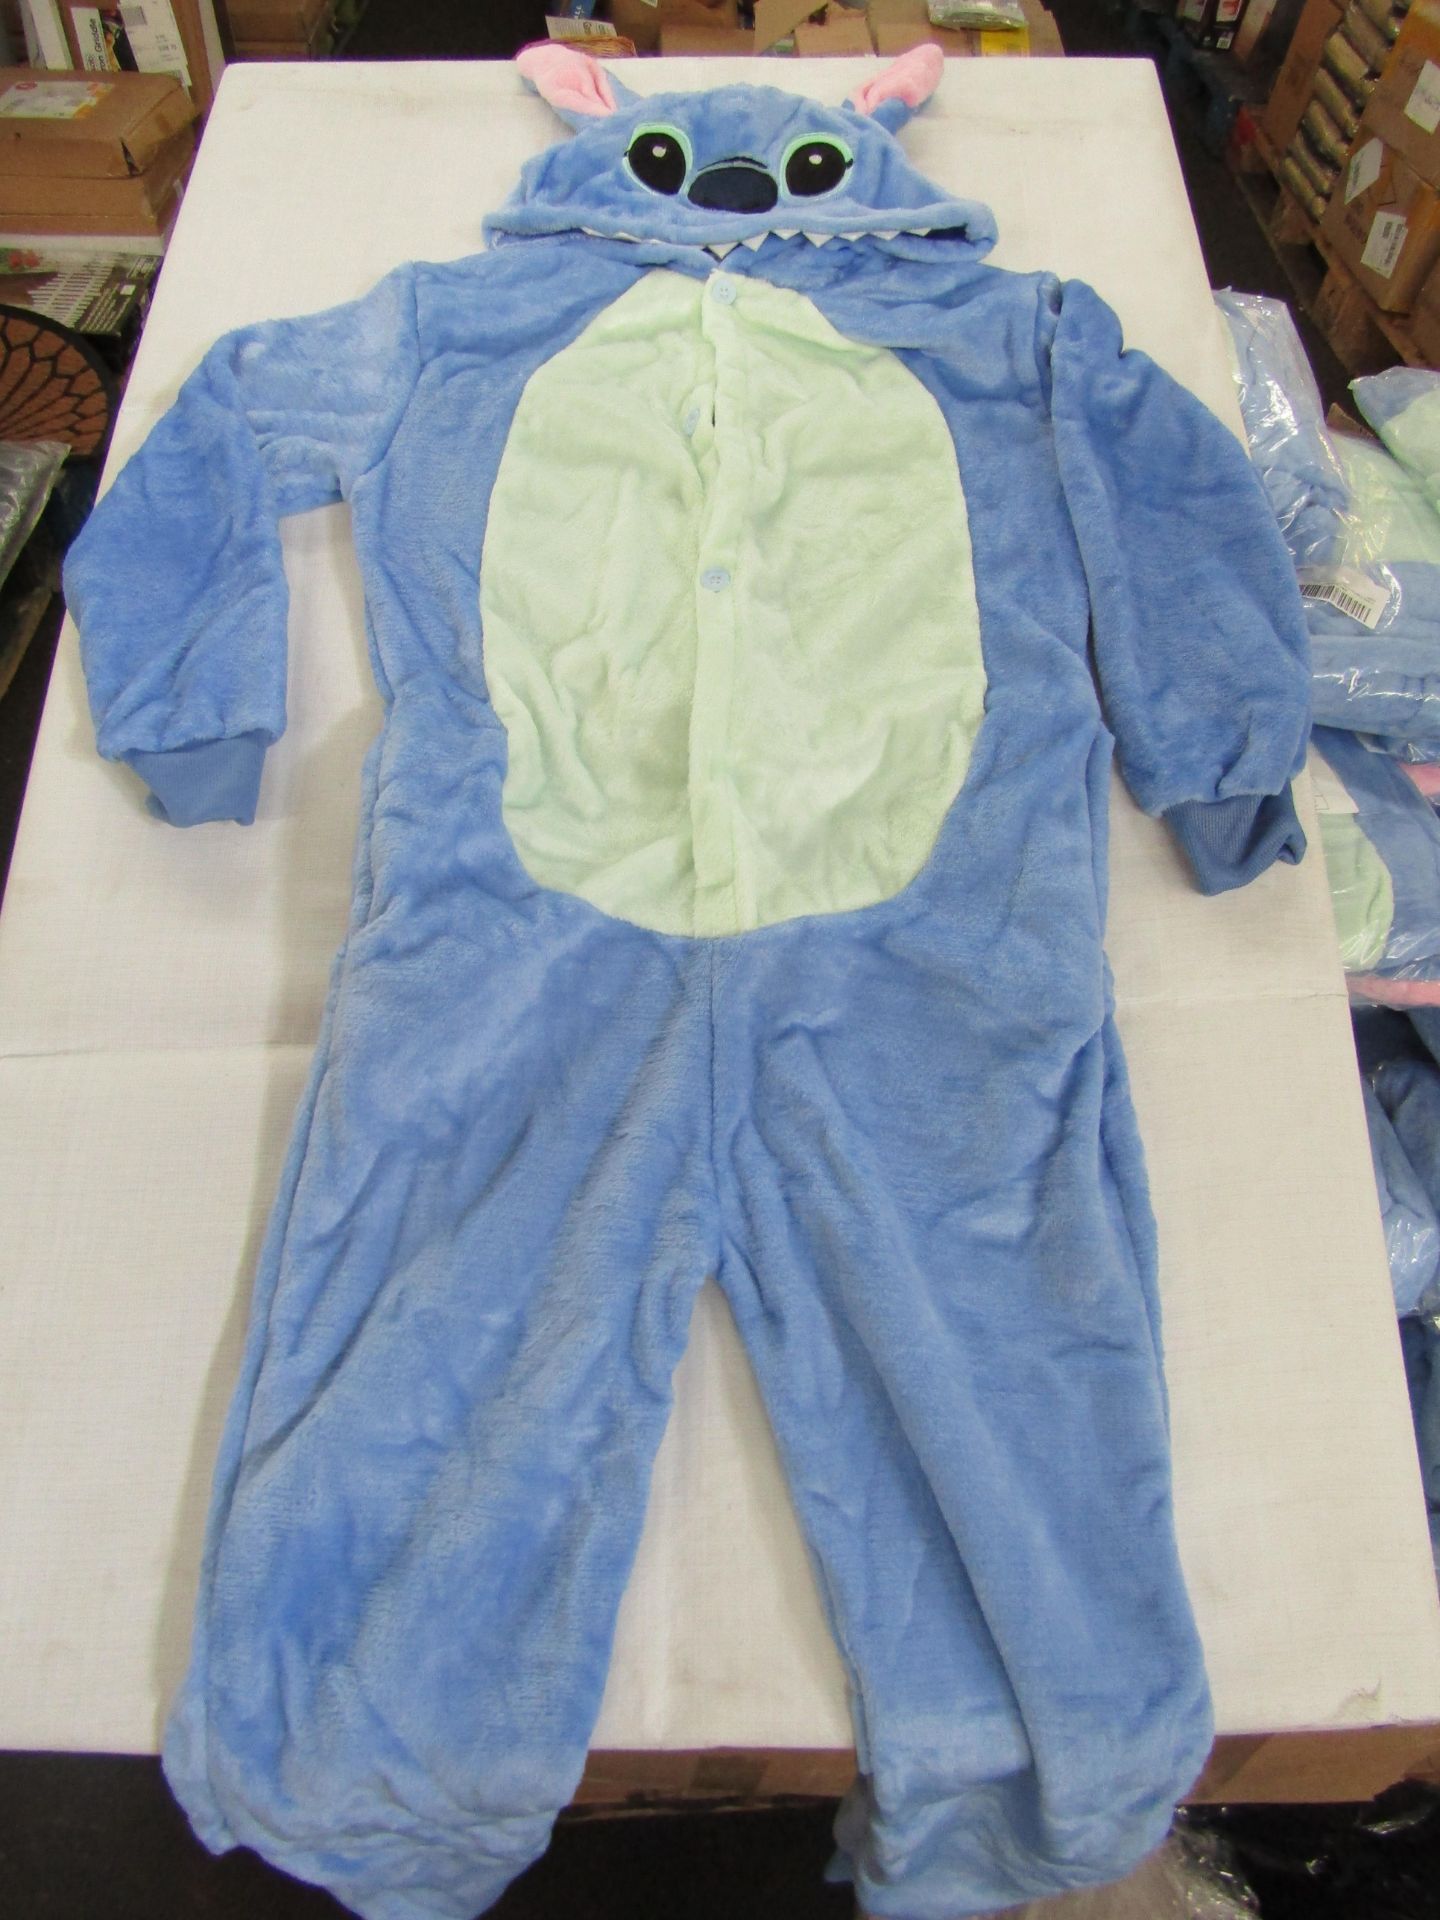 2x Unisex Onesie - Please See Image For Design - 9/10 Years - New & Packaged.